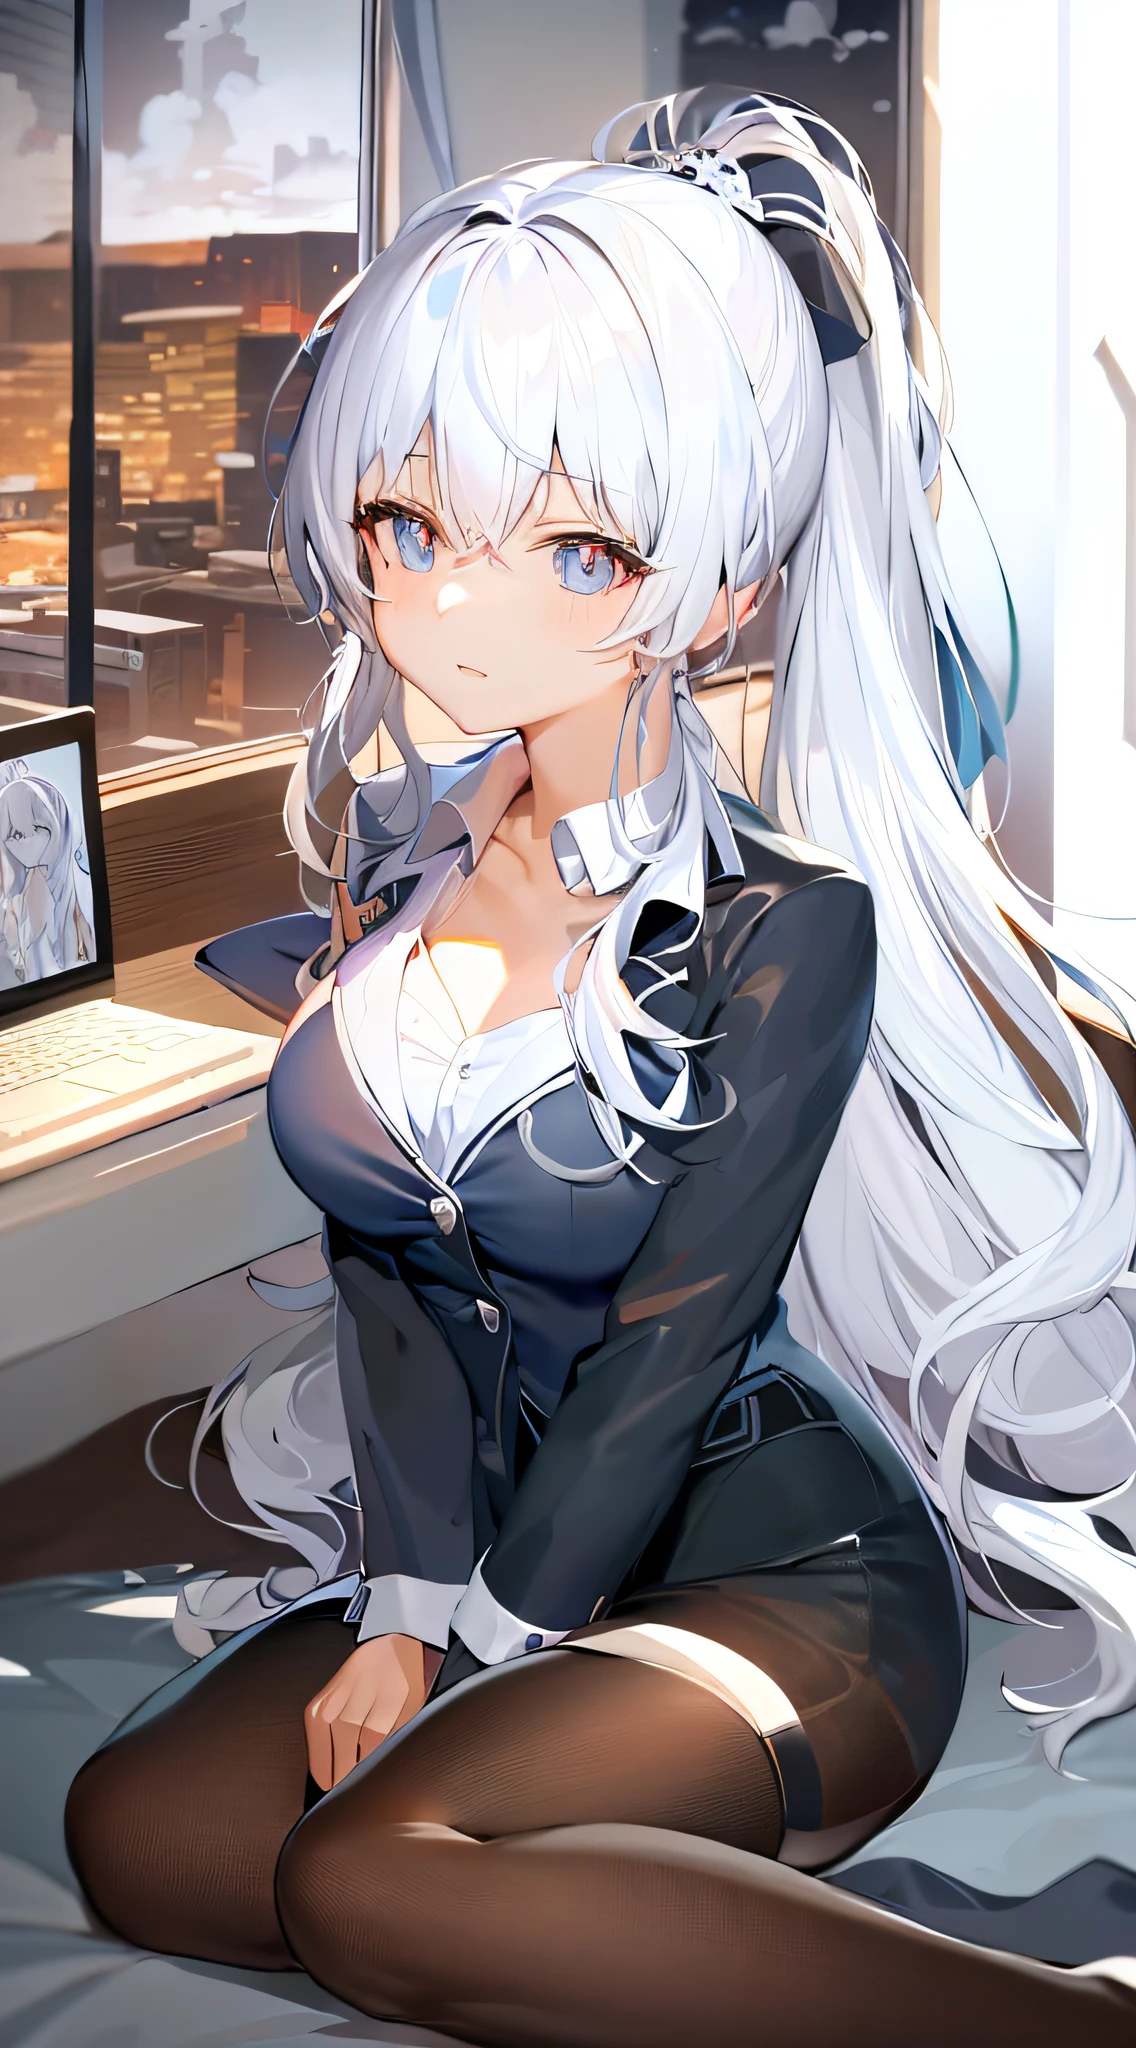 anime girl sitting on a bed with a laptop in her lap, kantai collection style, seductive anime girl, perfect white haired girl, anime moe artstyle, digital anime illustration, smooth anime cg art, white haired deity, detailed digital anime art, attractive anime girl, beautiful anime high school girl, from girls frontline, digital anime art, clean detailed anime art